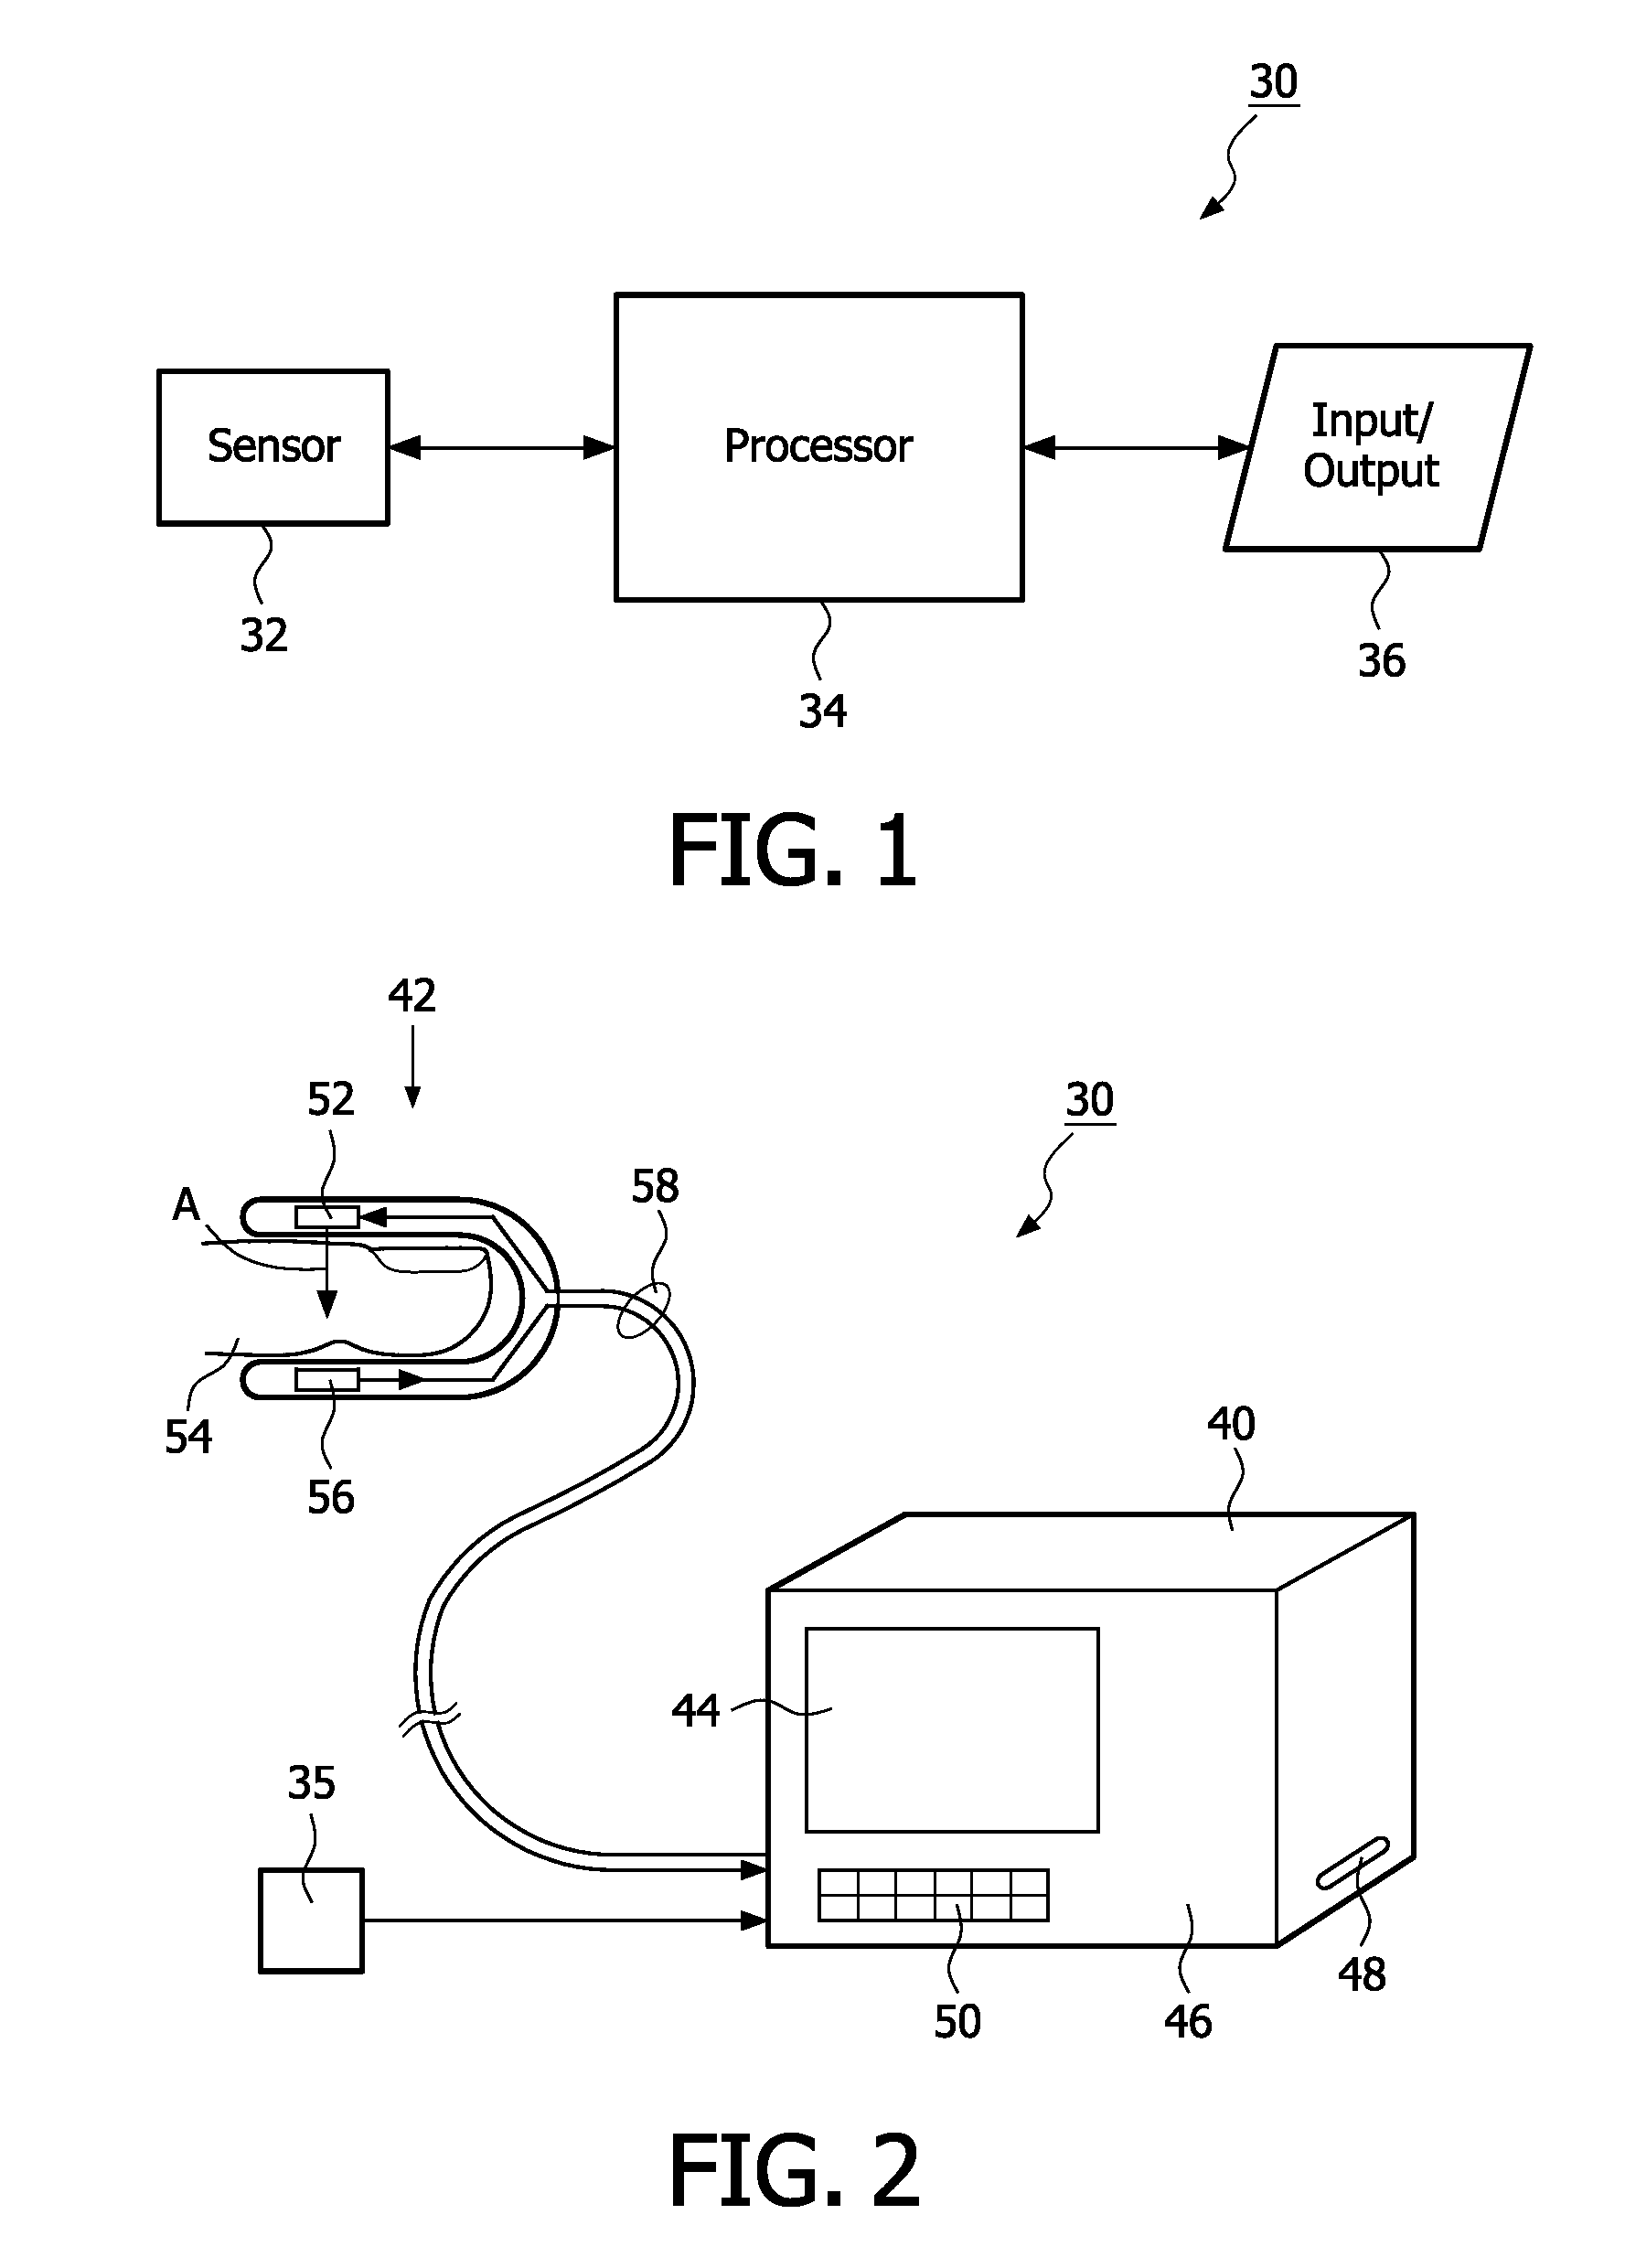 Apparatus and method for monitoring pressure related changes in the extra-thoracic arterial circulatory system